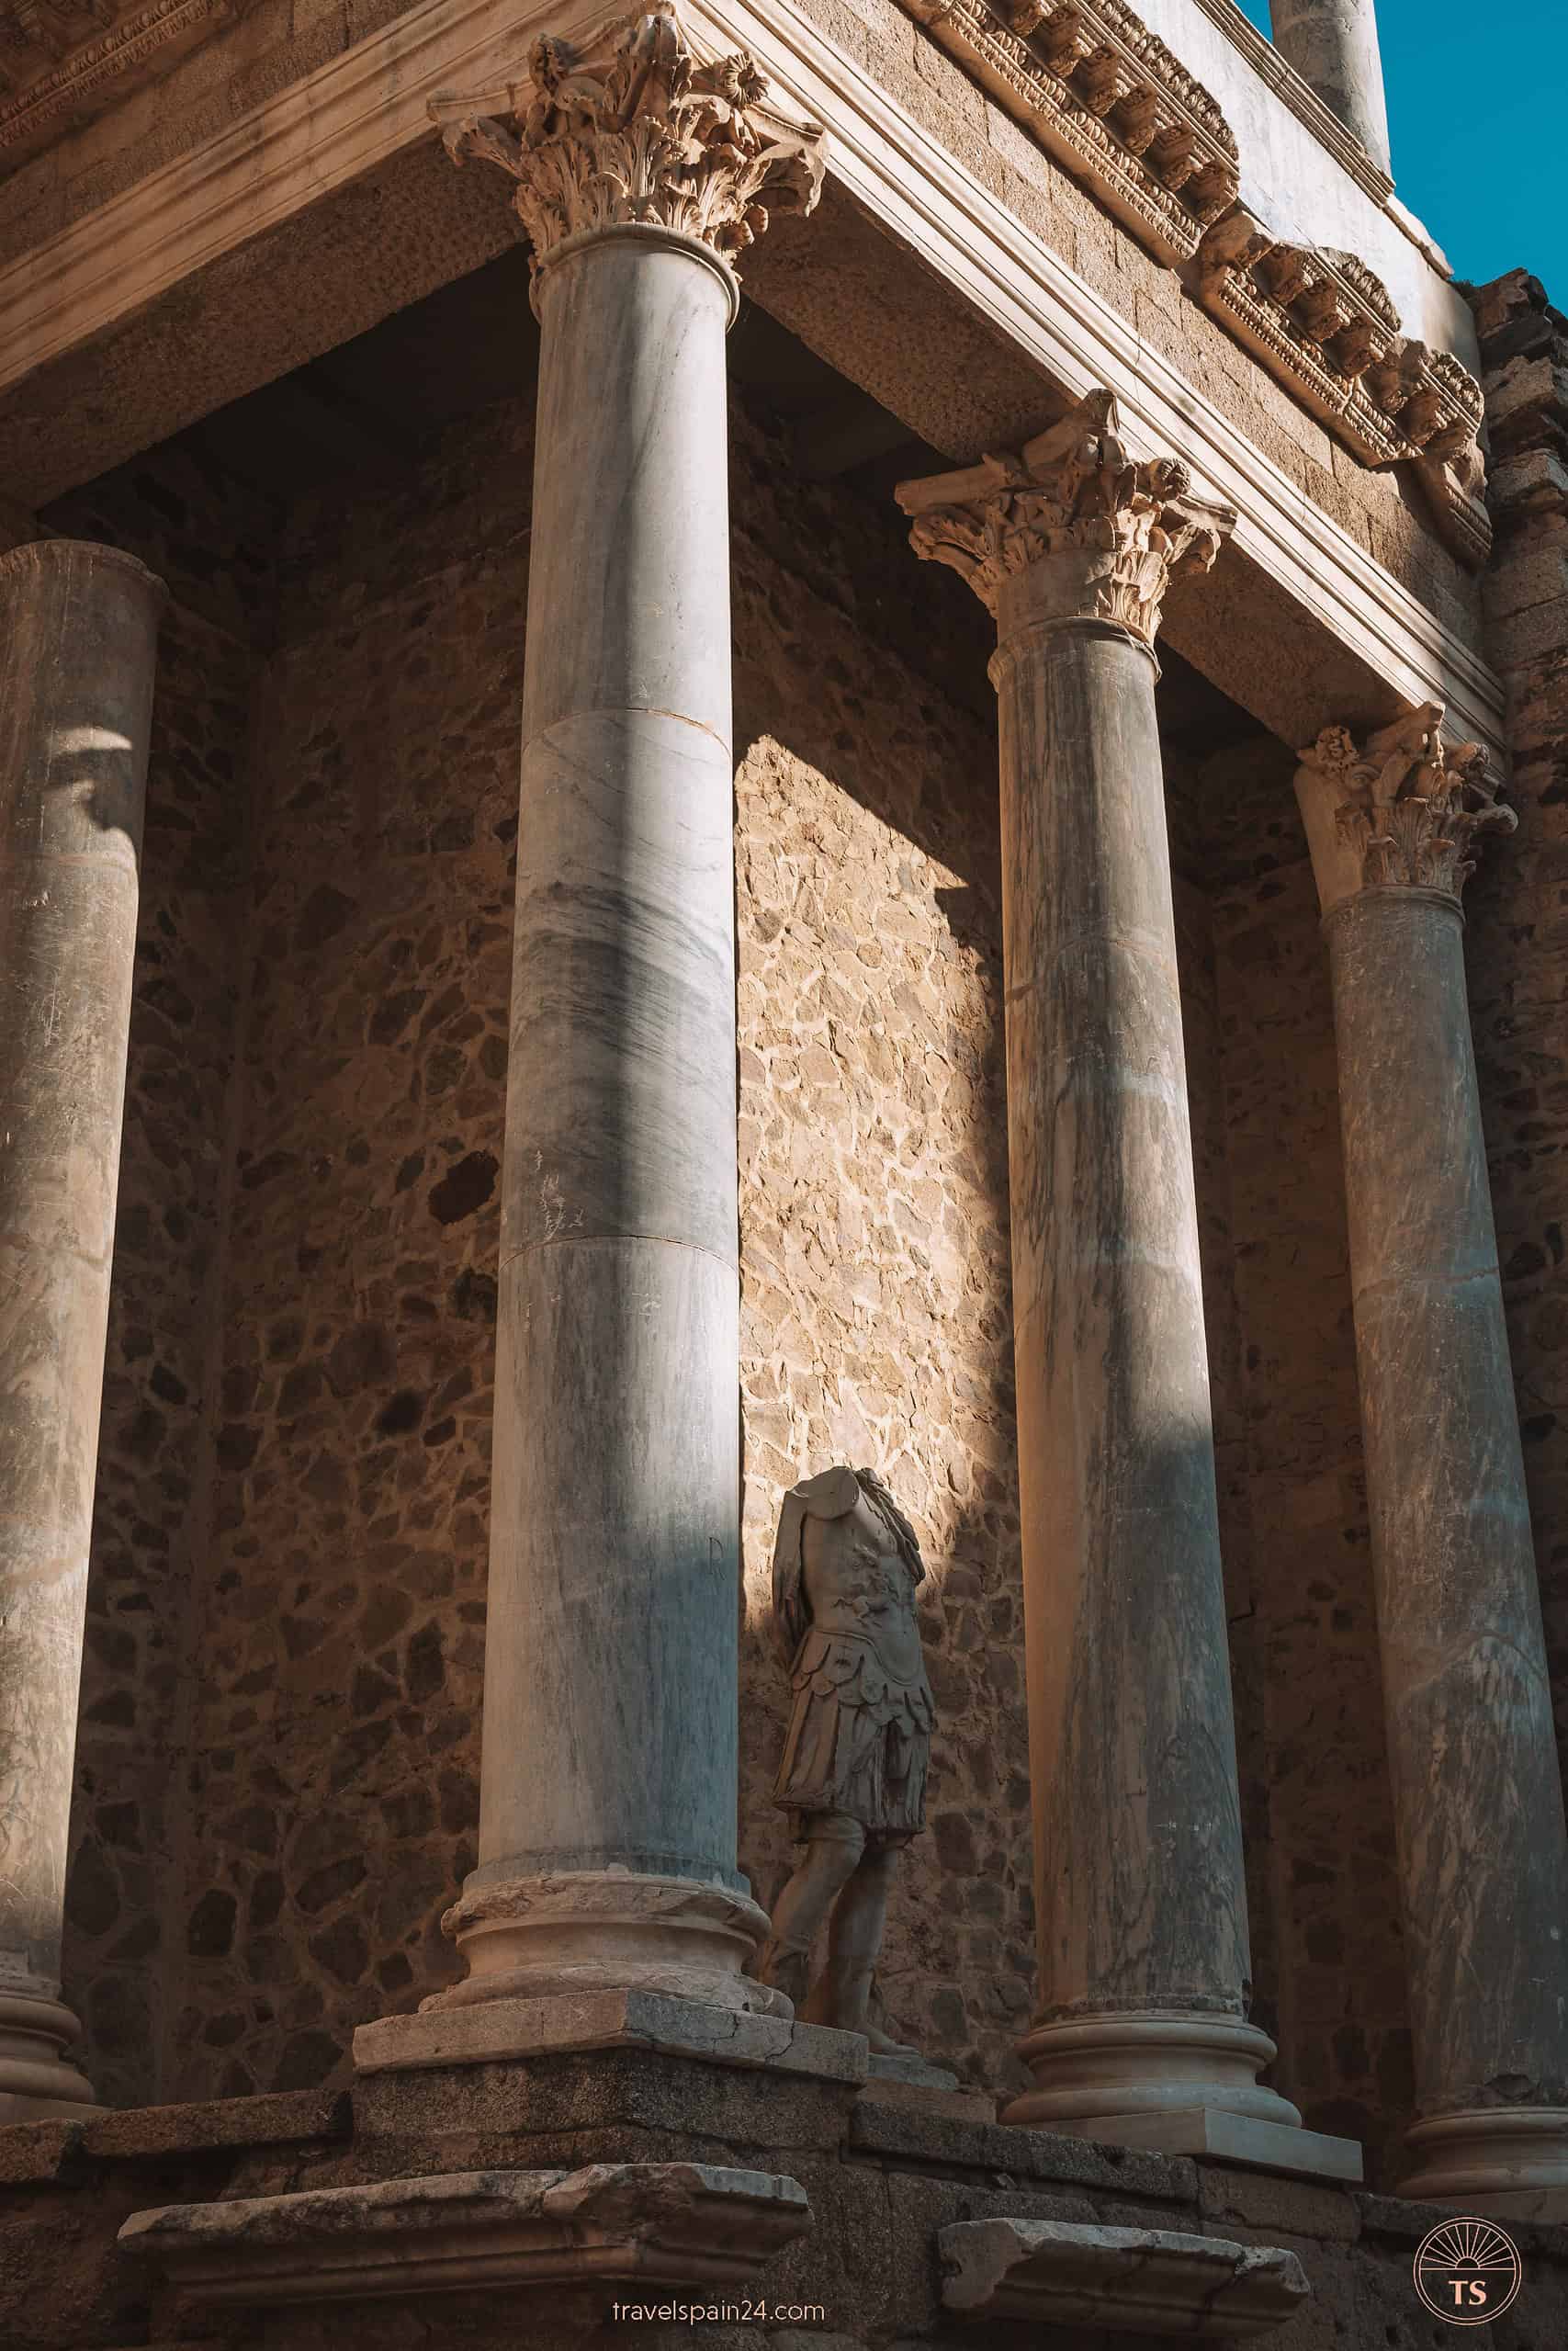 Close-up of the pillars at the Roman Theatre in Mérida, featuring a weathered Roman statue between columns, showcasing the architectural heritage of the city